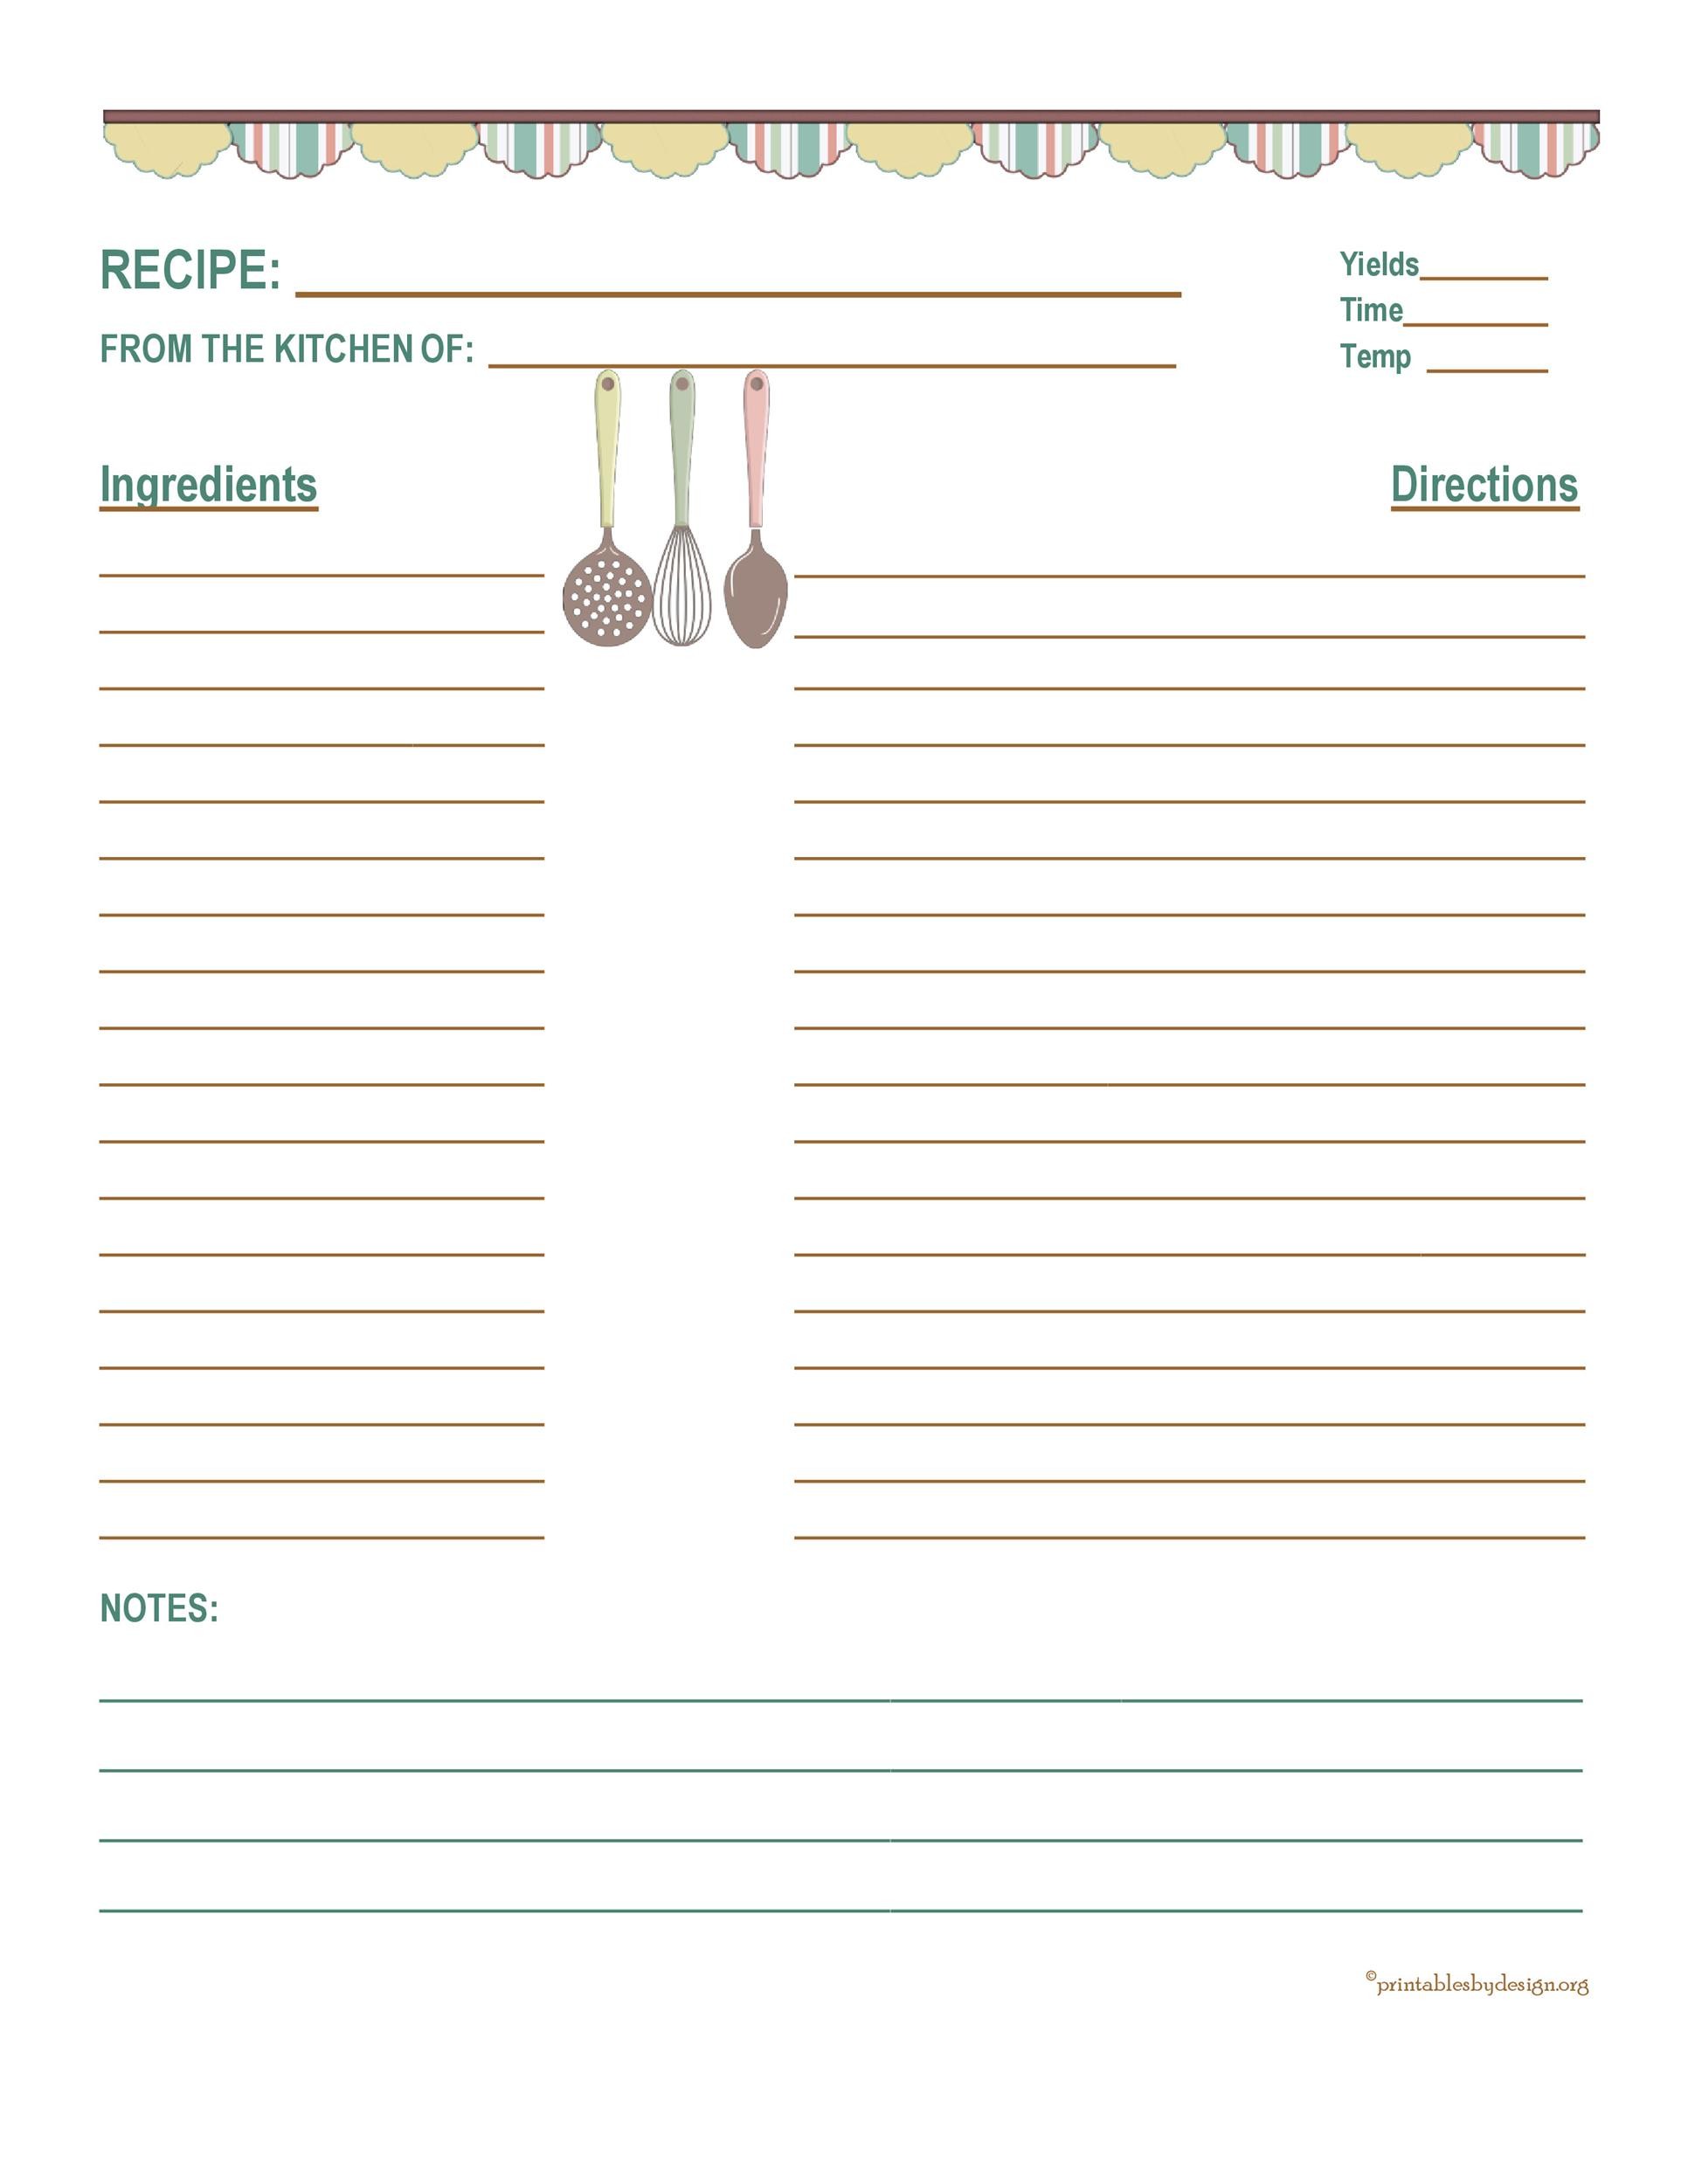 Recipe of Recipe Template Pages Inside Free Recipe Card Templates For Microsoft Word